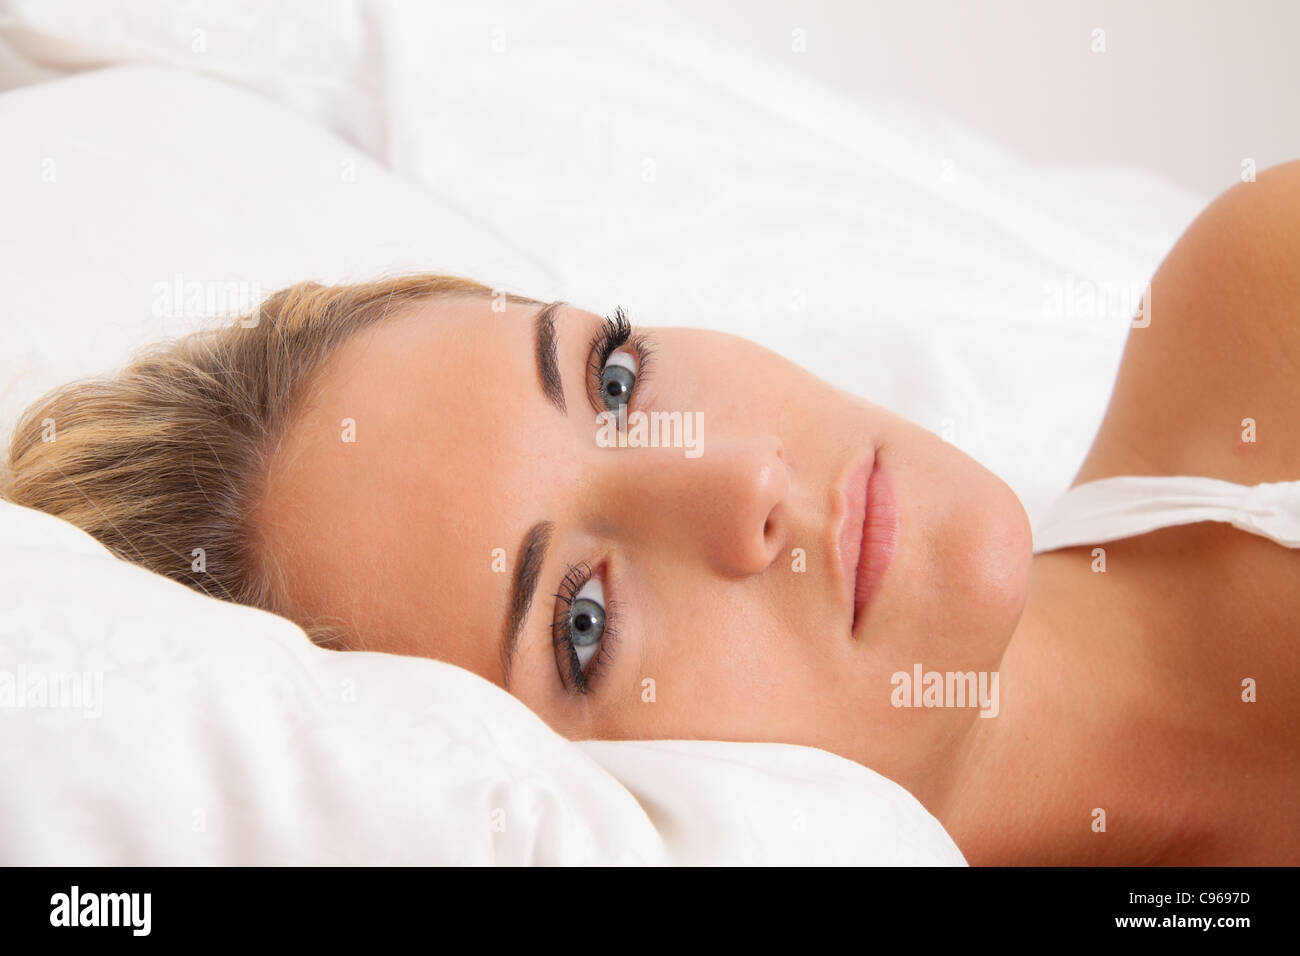 A young woman lies awake in bed. Sleepless and thoughtful. Stock Photo